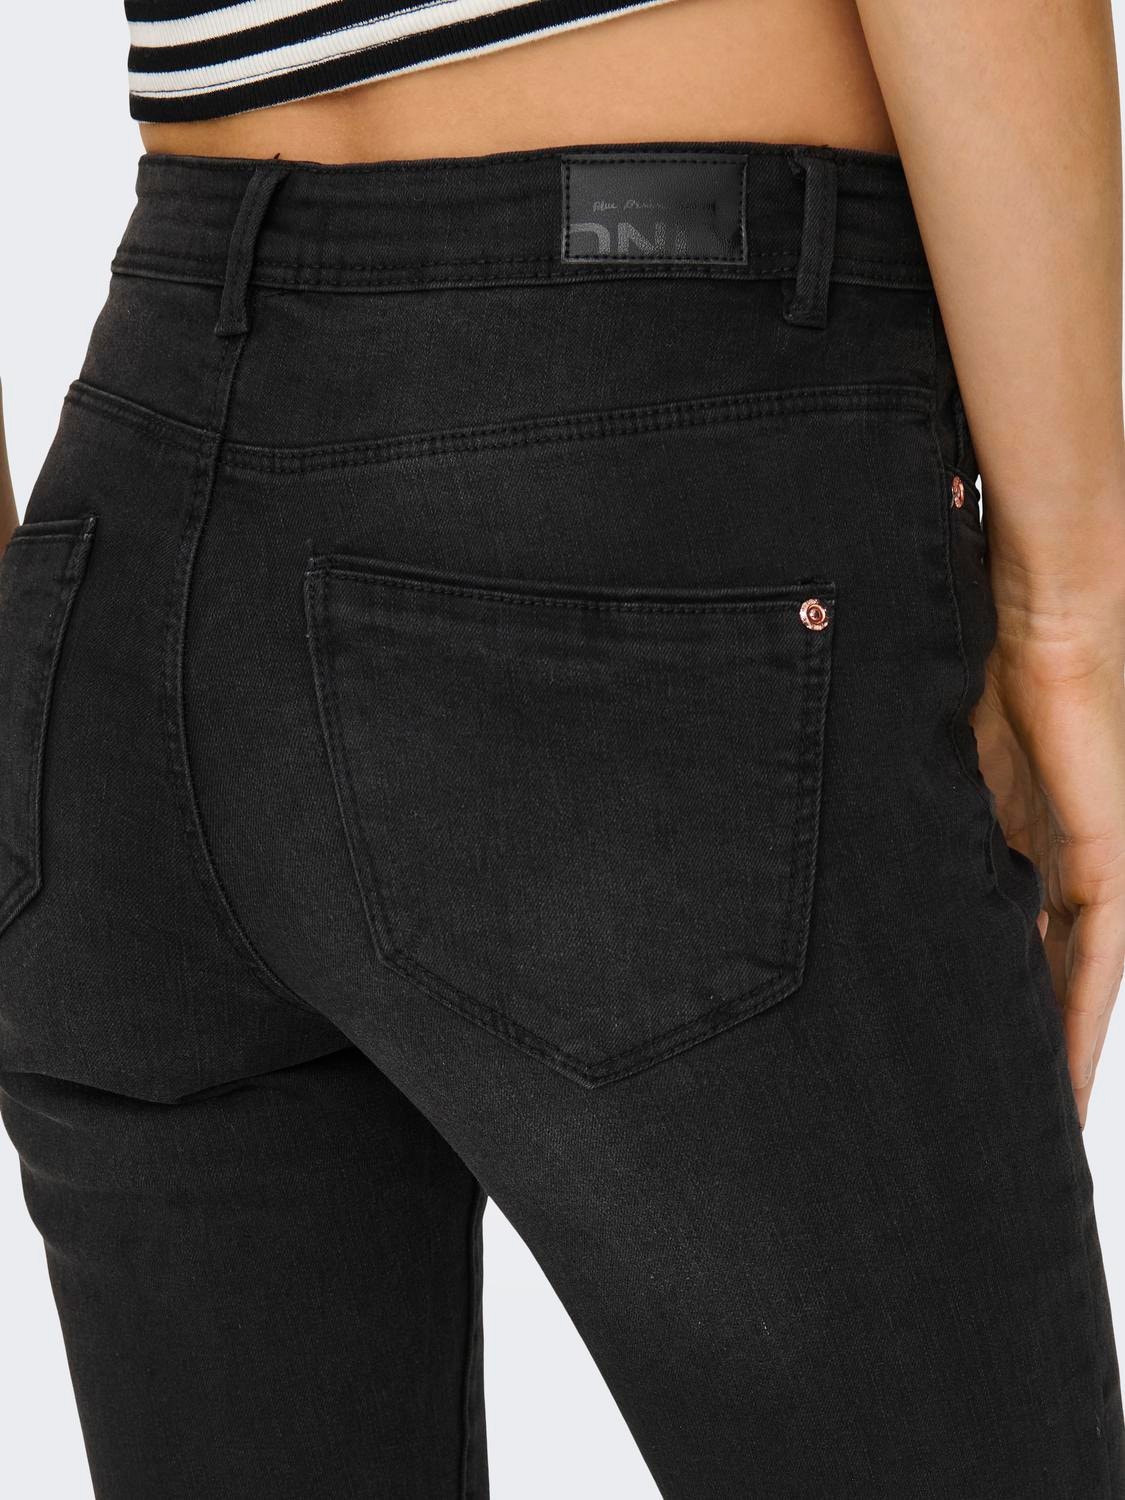 ONLY Skinny Fit Mid waist Jeans -Washed Black - 15230459